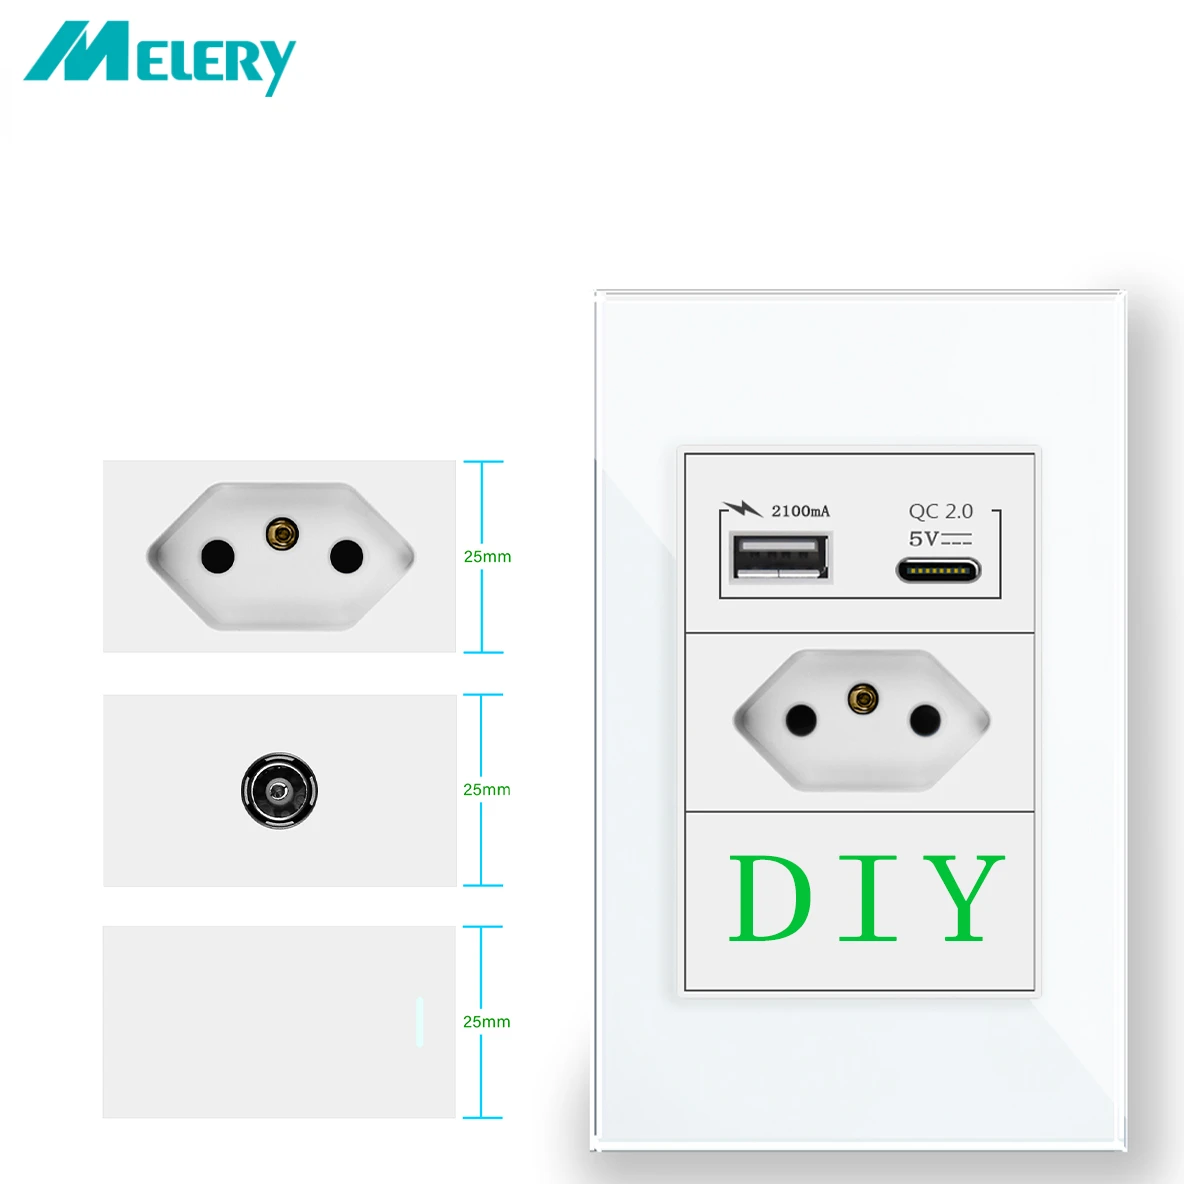 Melery Brazil 20A Outlets DIY Custom Switch Socket Type-C USB Cable TV Port Module BR Electric Wall Plug Home Blank Accessosies